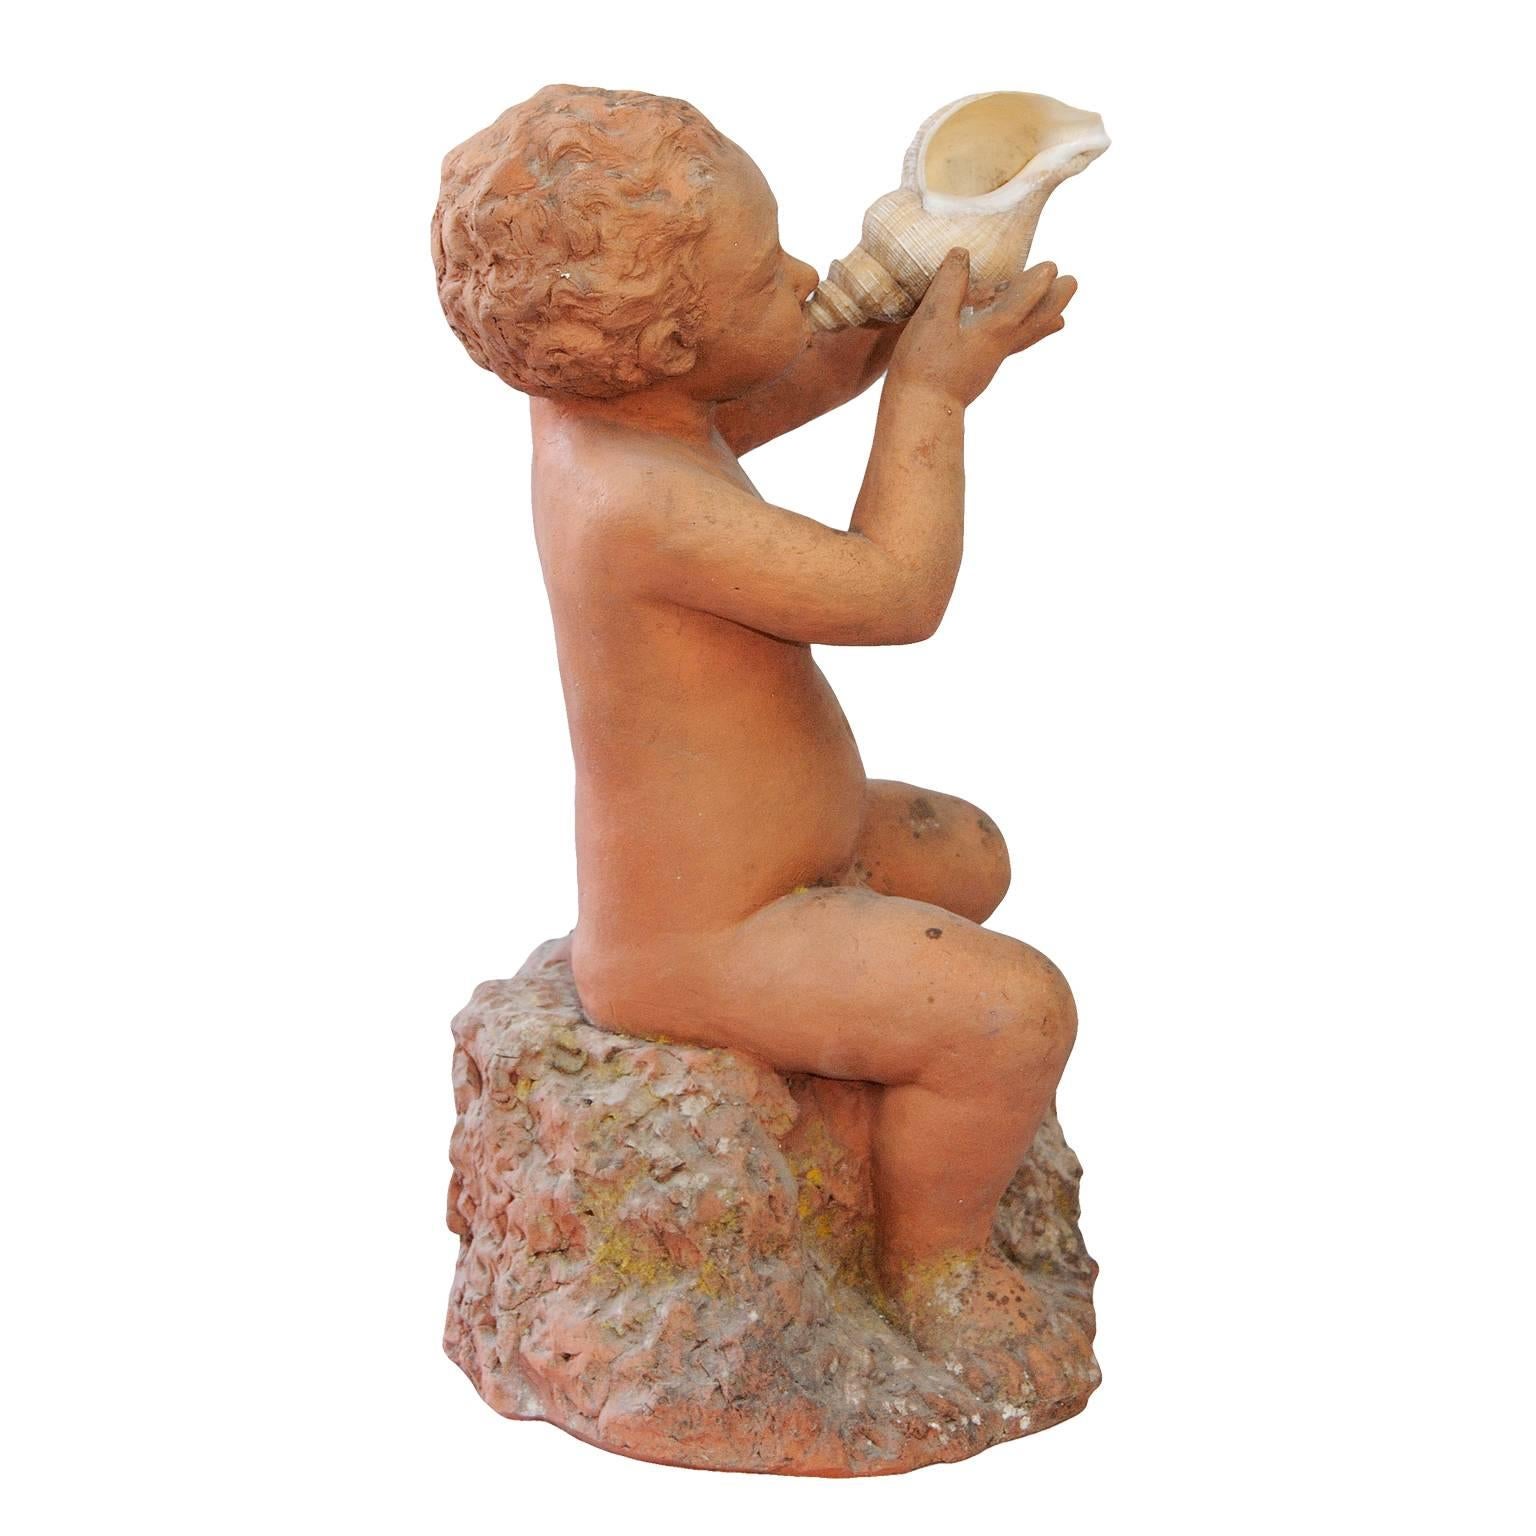 This is a rather beautiful mid-19th century terra cotta putti, he is holding a real shell. This putti has the potential to be adapted and incorporated into a fountain, circa 1860.